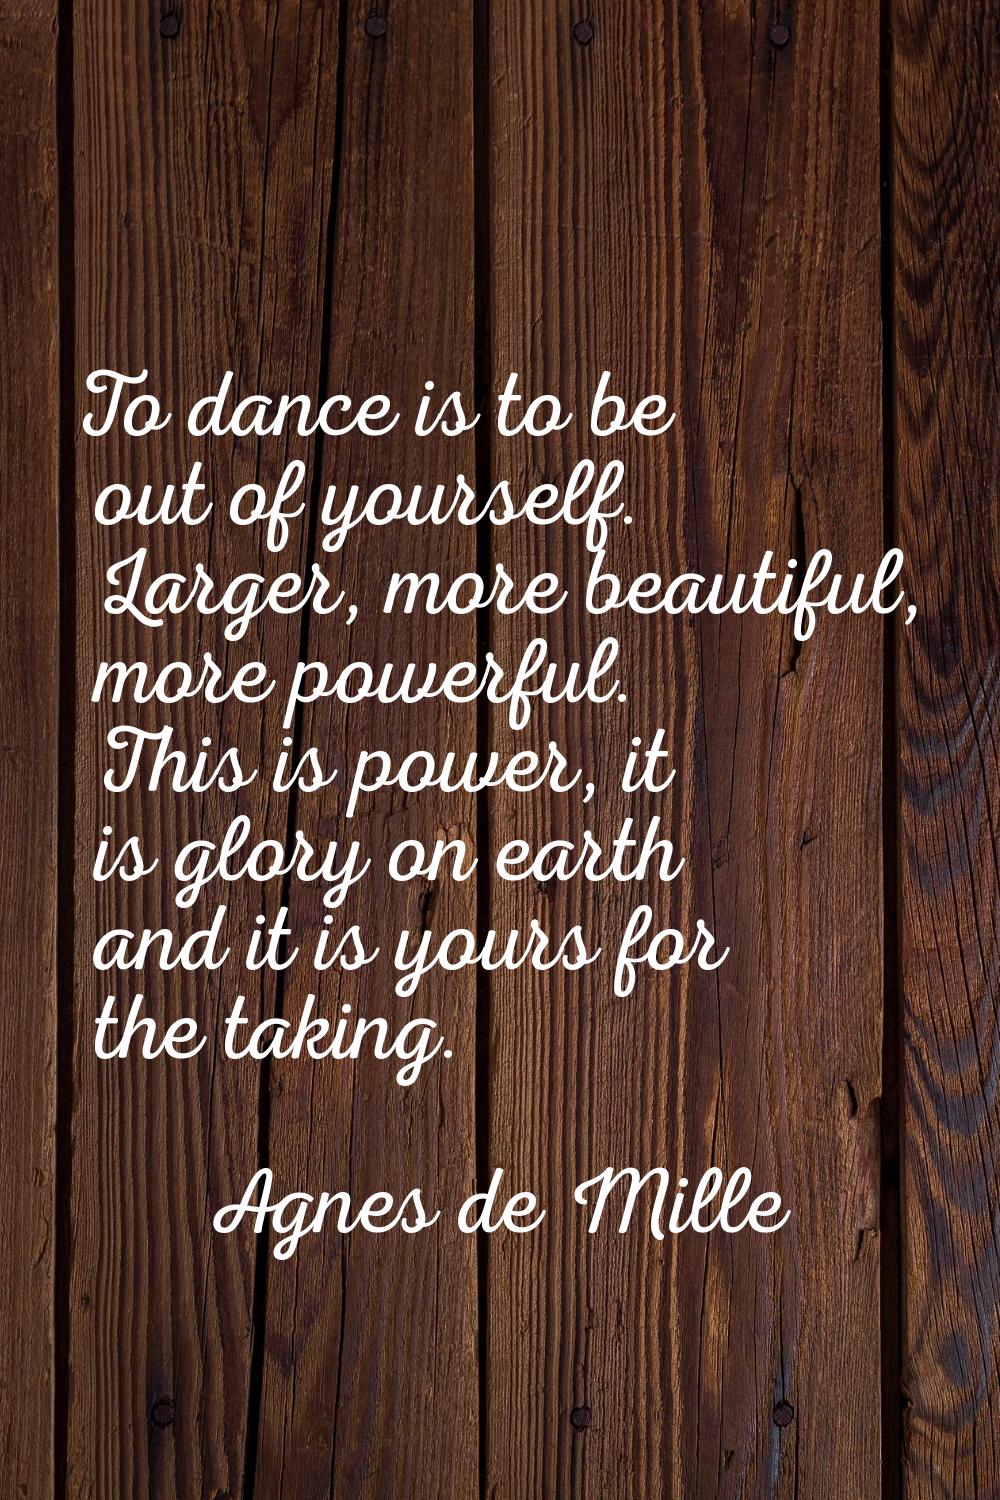 To dance is to be out of yourself. Larger, more beautiful, more powerful. This is power, it is glor